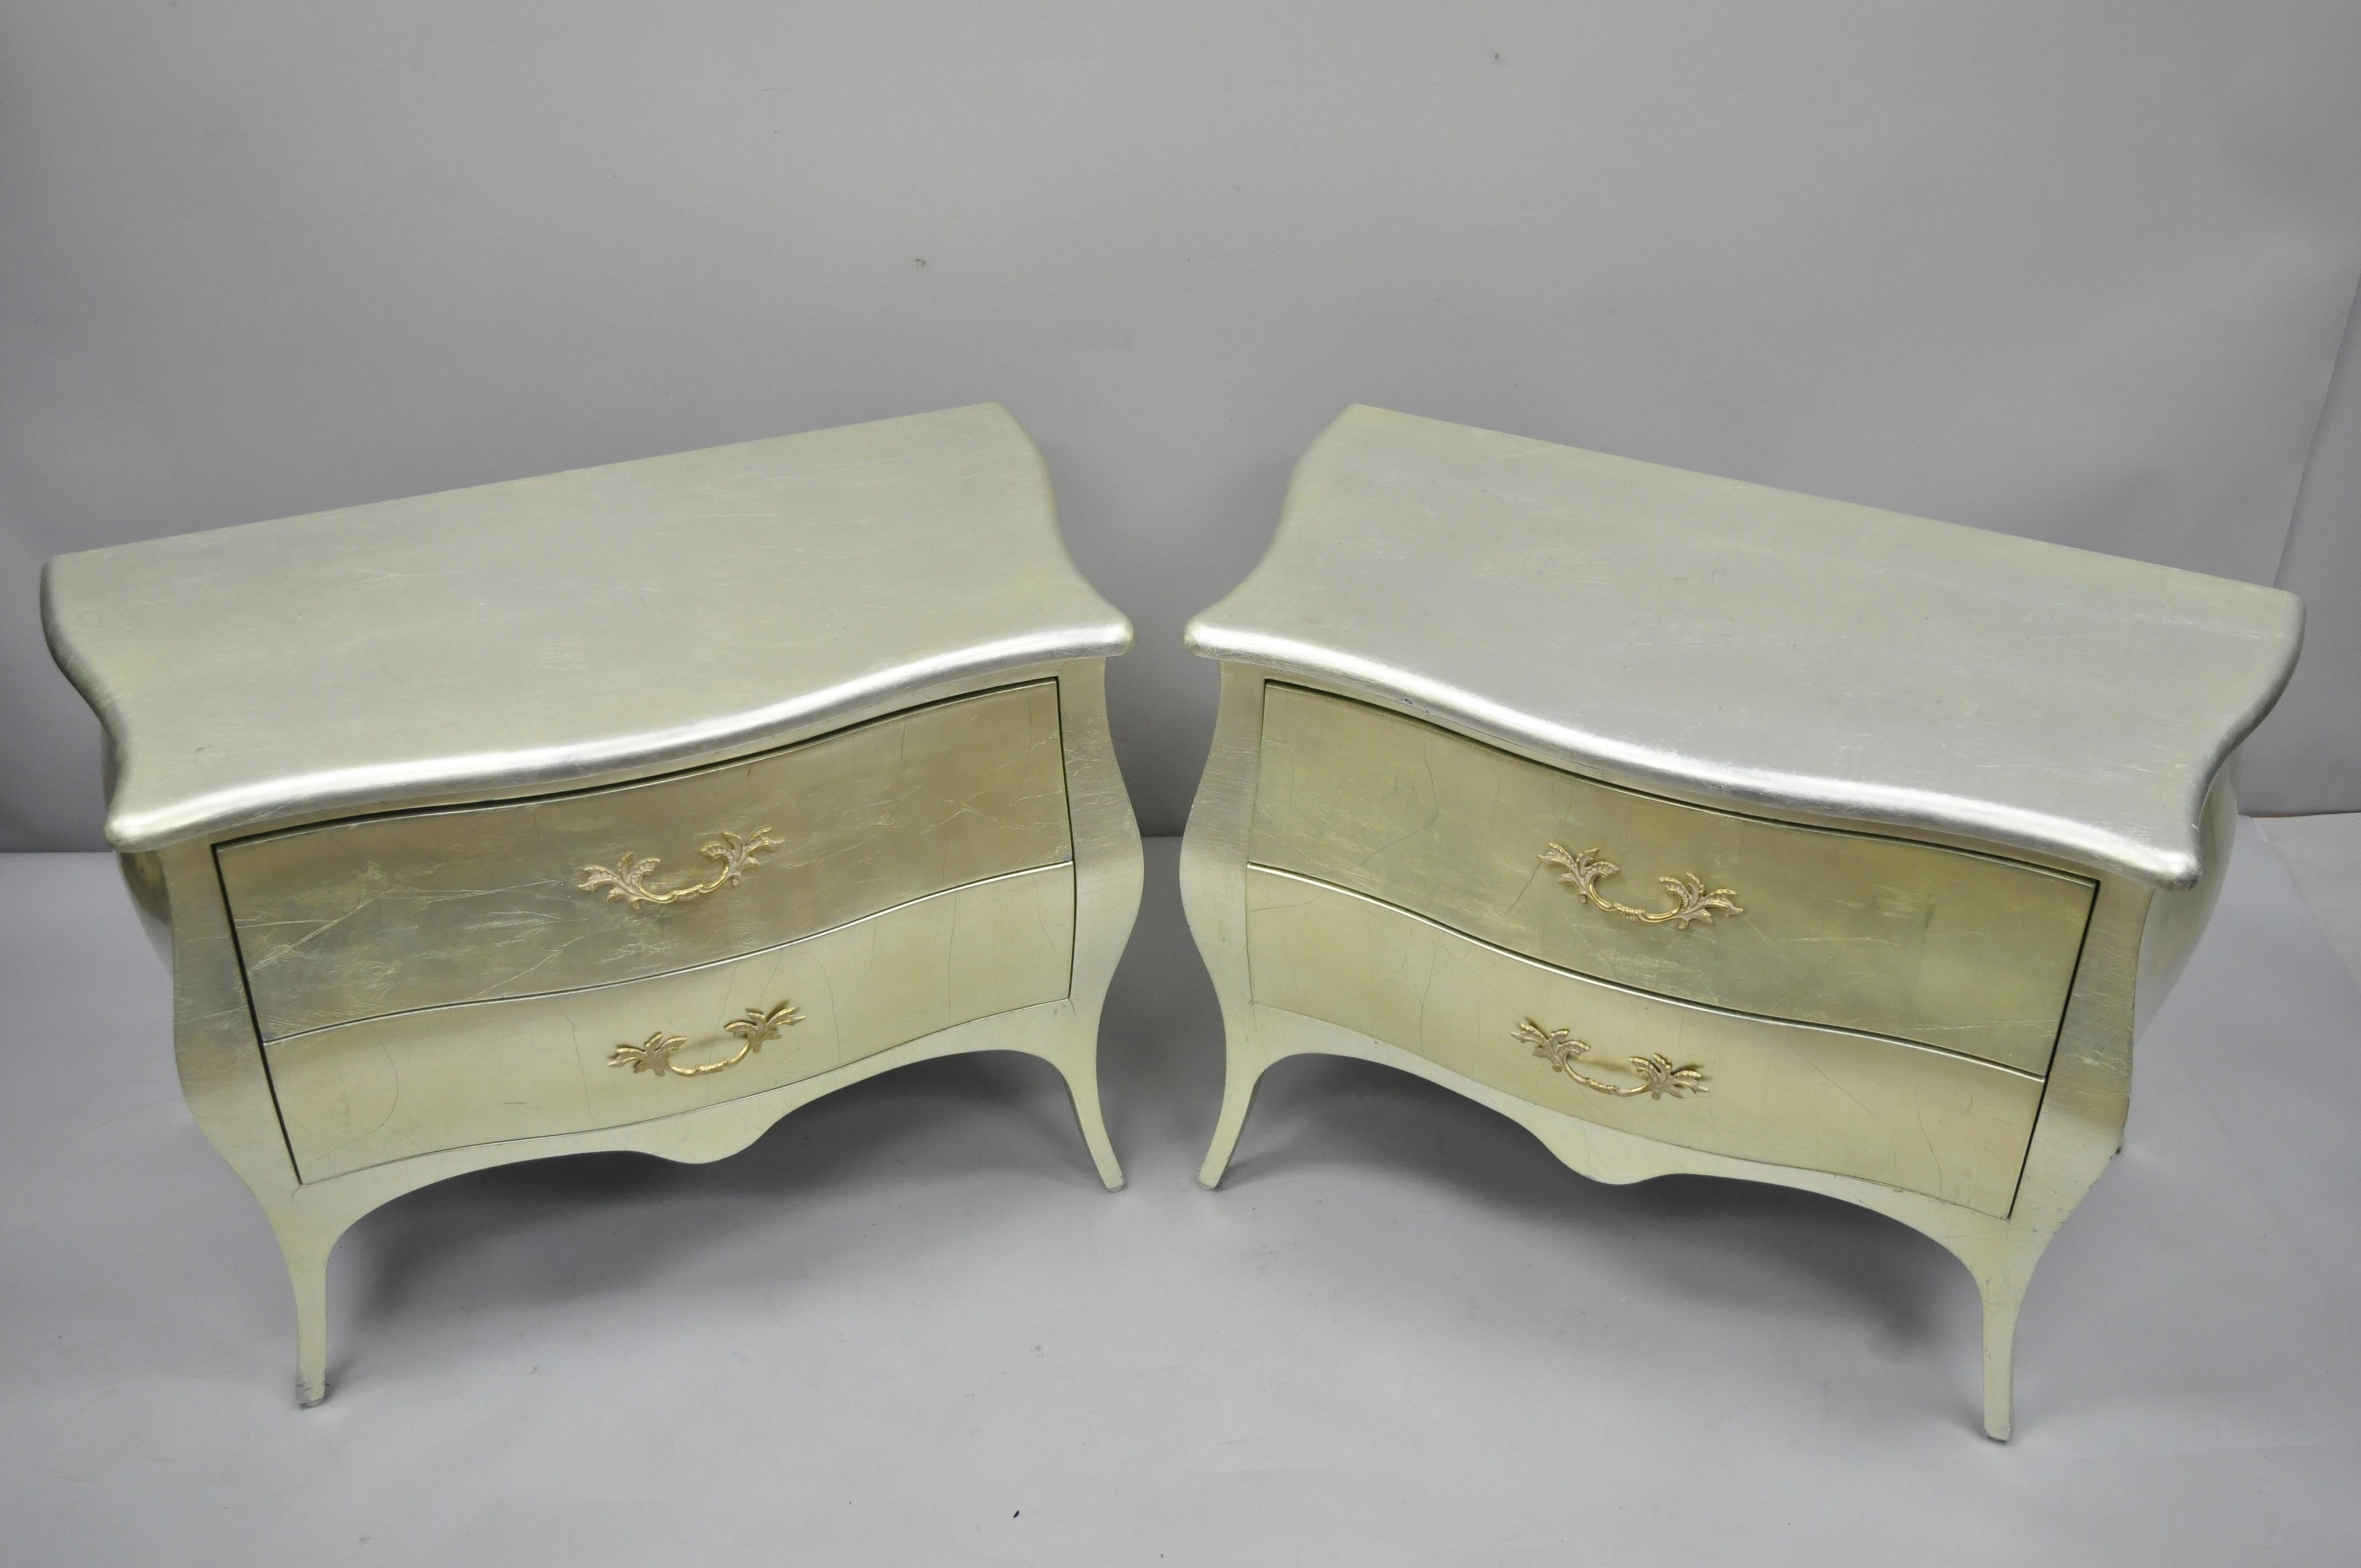 Pair of Louis XV French Hollywood Regency style bombe commode nightstands by Jimeco. Item features silver or gold leaf finish, shapely bombe form, original label, 2 drawers, tapered legs, solid brass hardware, great style and form. Late 20th